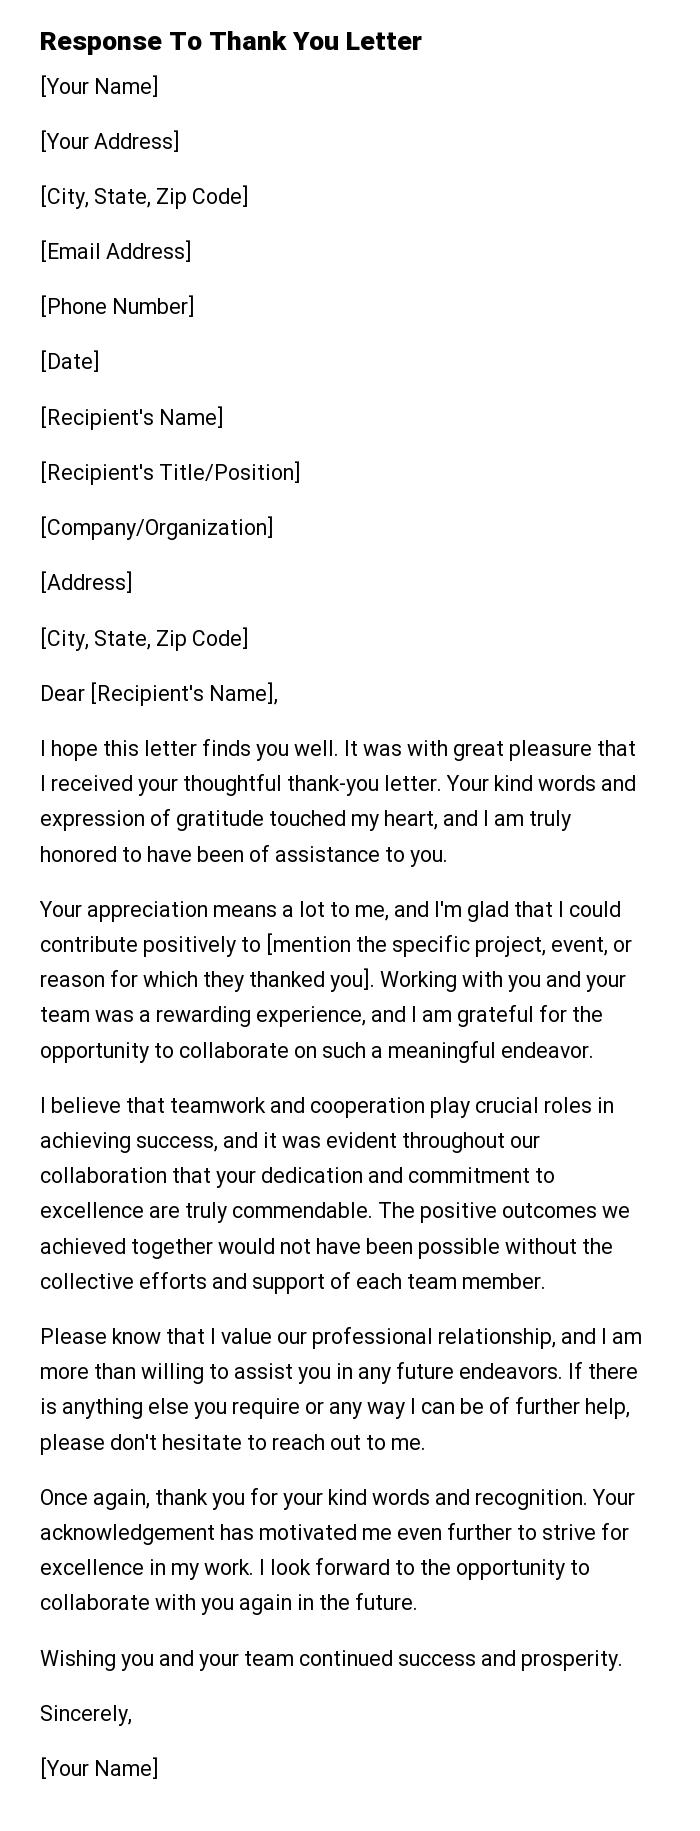 Response To Thank You Letter